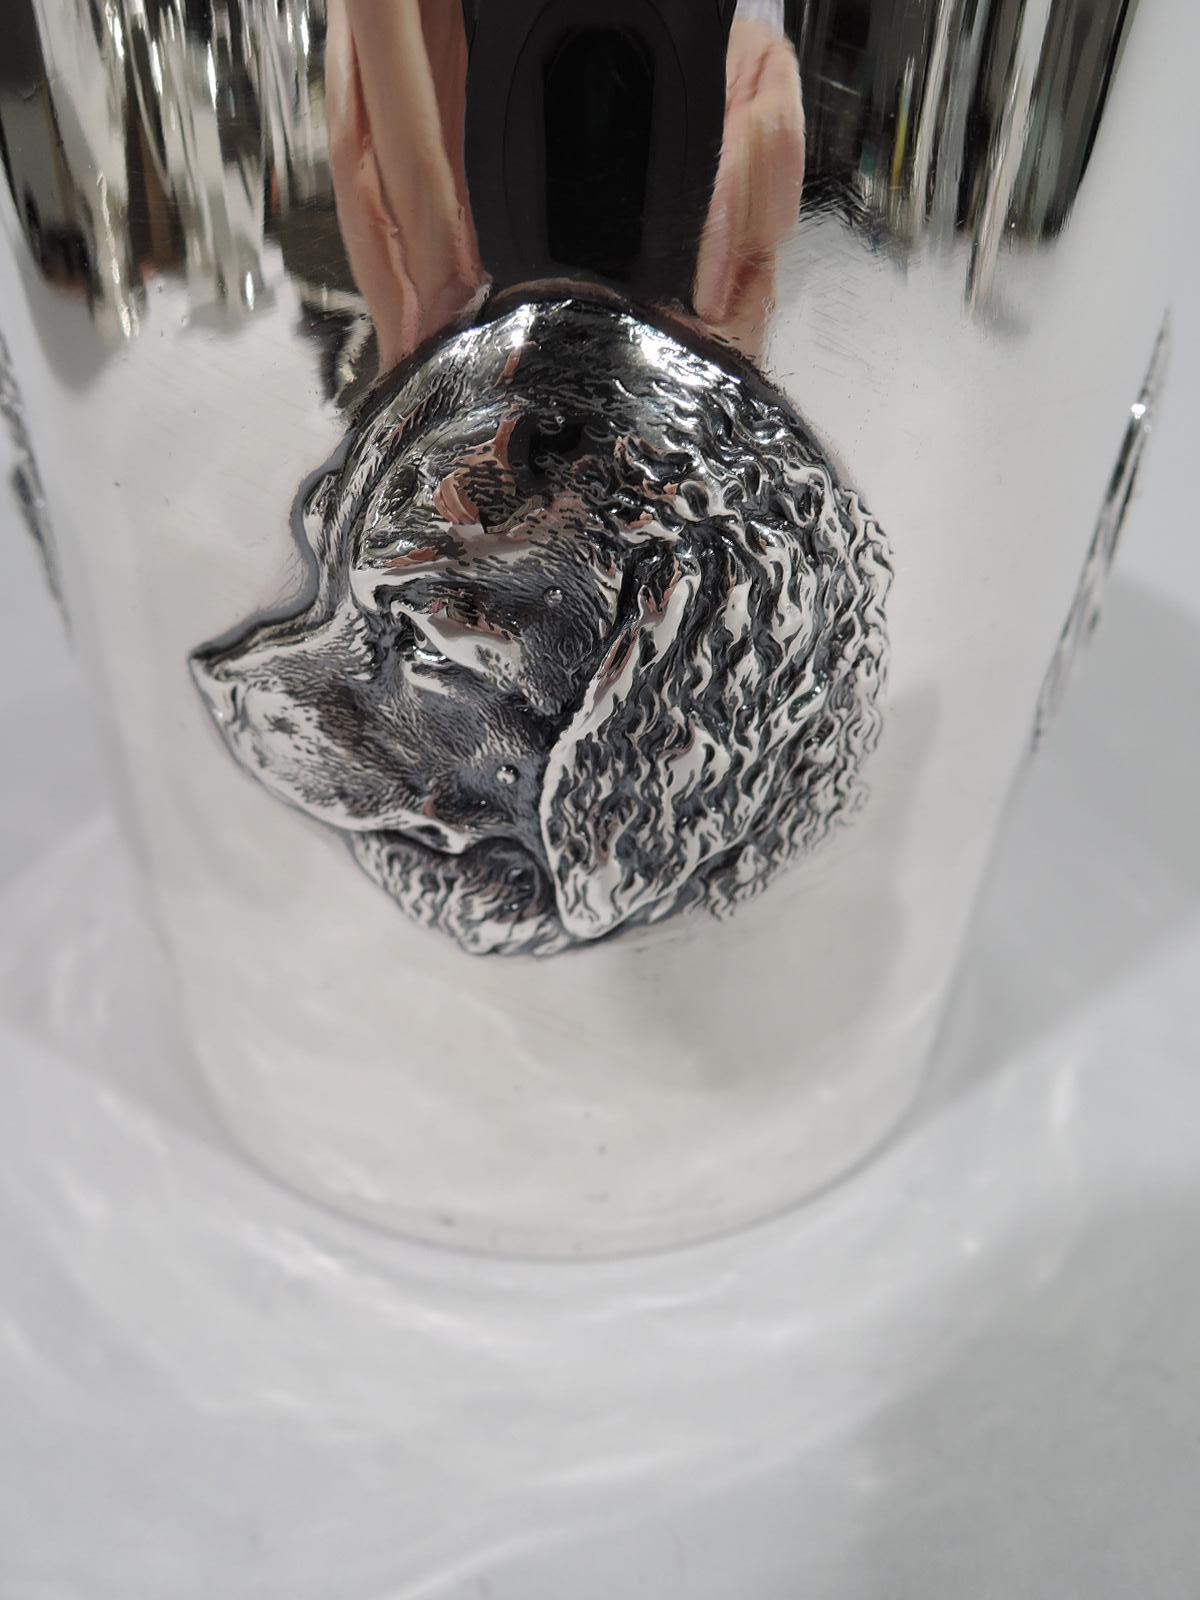 Fido Mug, Antique Gorham Sterling Silver Baby Cup with Canine Medley 1